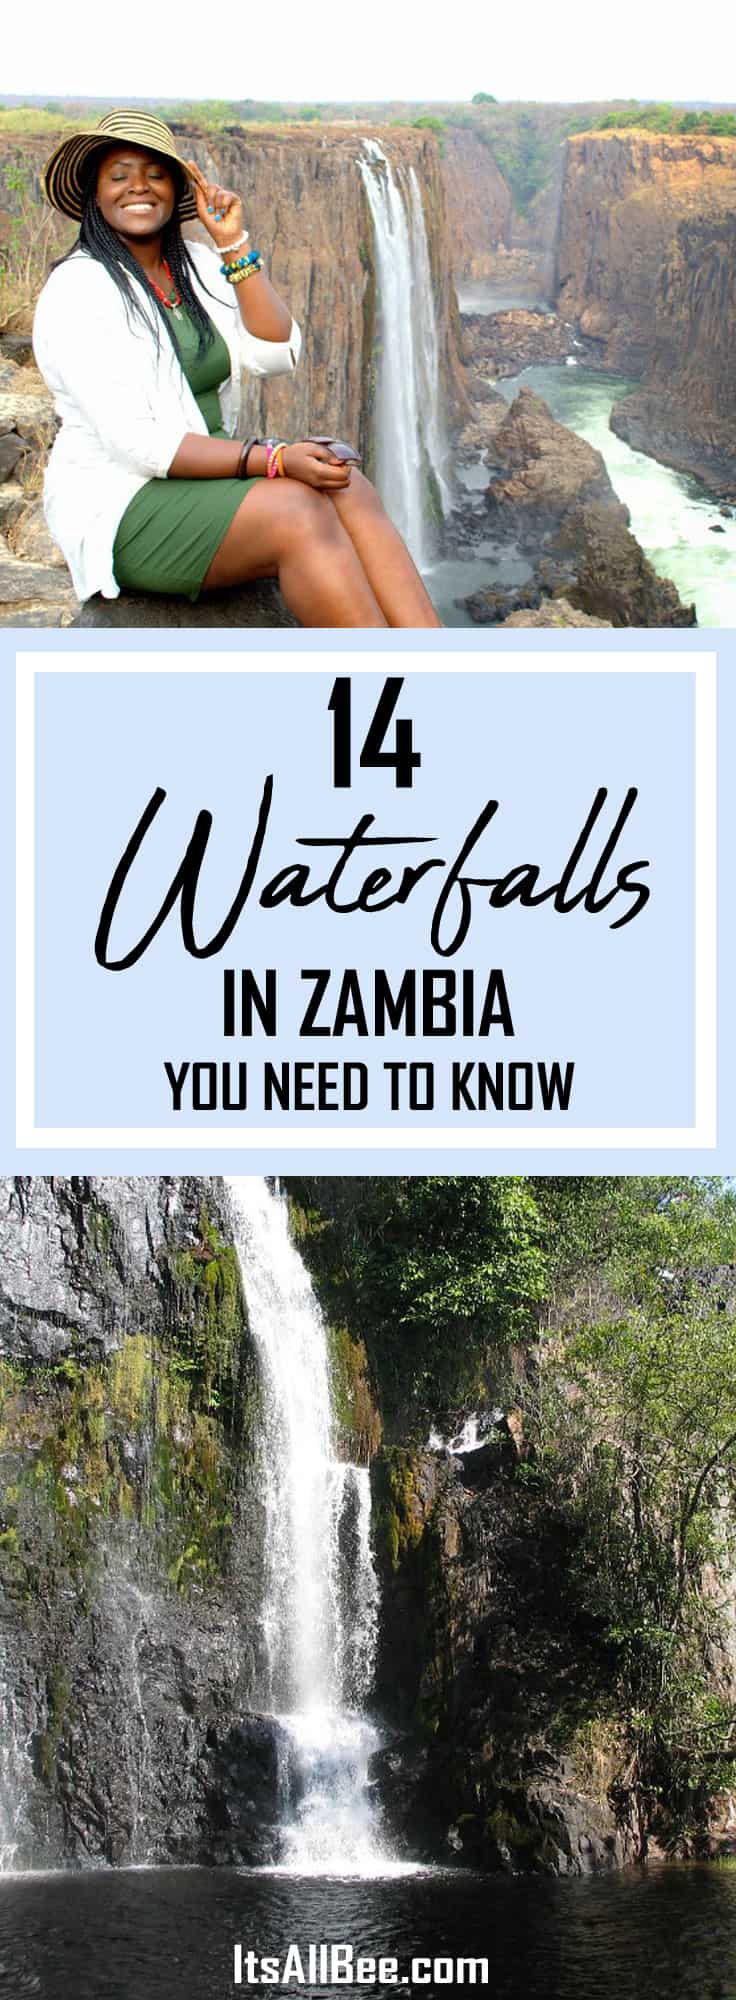 14 Waterfalls In Zambia | falls in zambia Beyond Victoria Falls #itsallbee #africa #traveltips #adventure #vacation #luxury #budget #backpacking